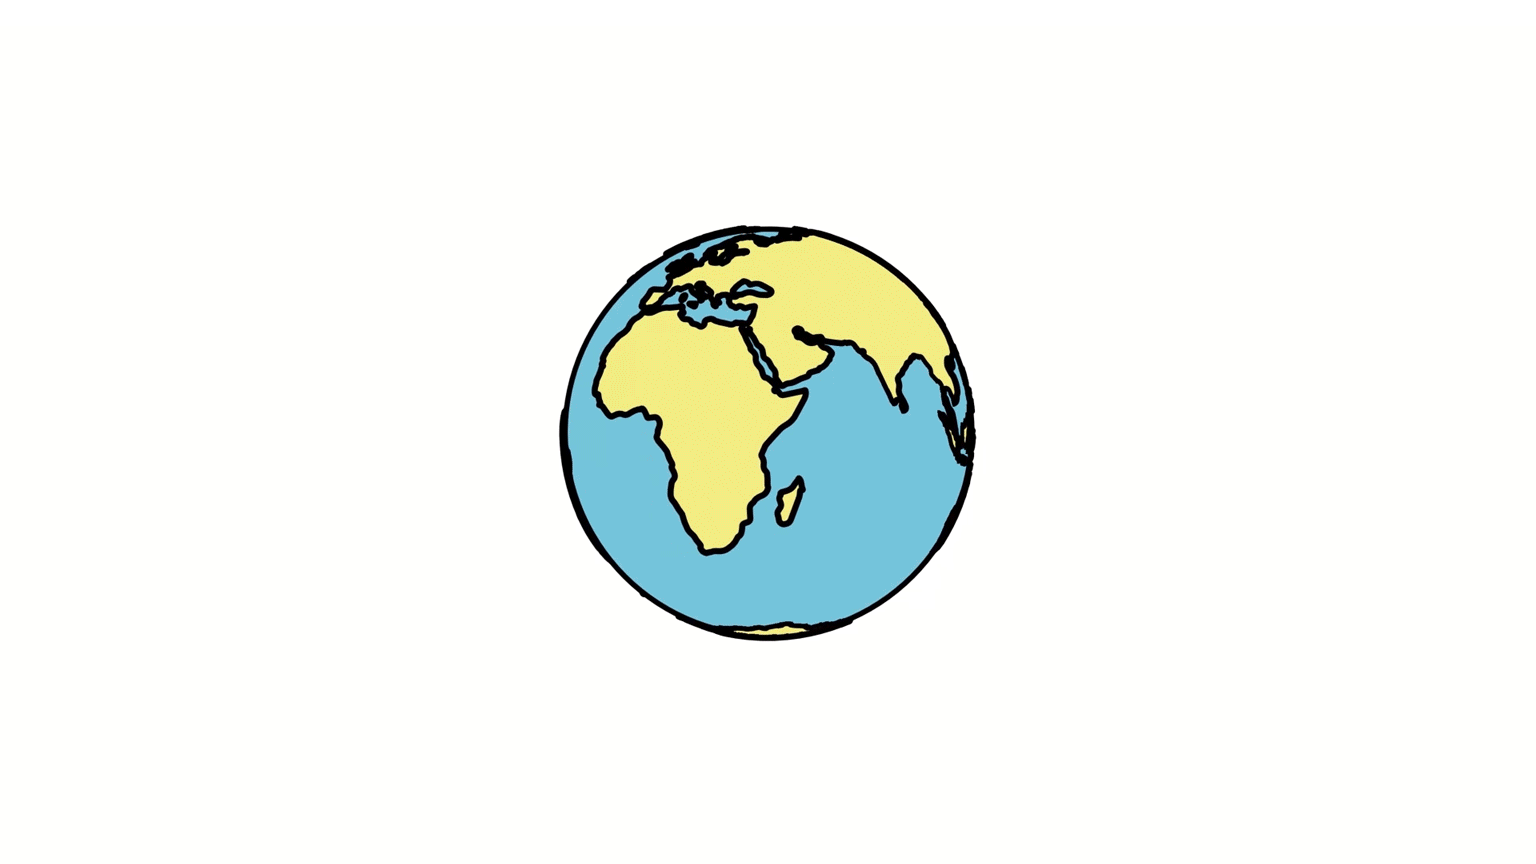 An animated globe spins on its axis. Colored yellow and blue, the globe shifts and changes shape, becoming squashed, stretched, inverted and torn open, before returning  to its original round shape.